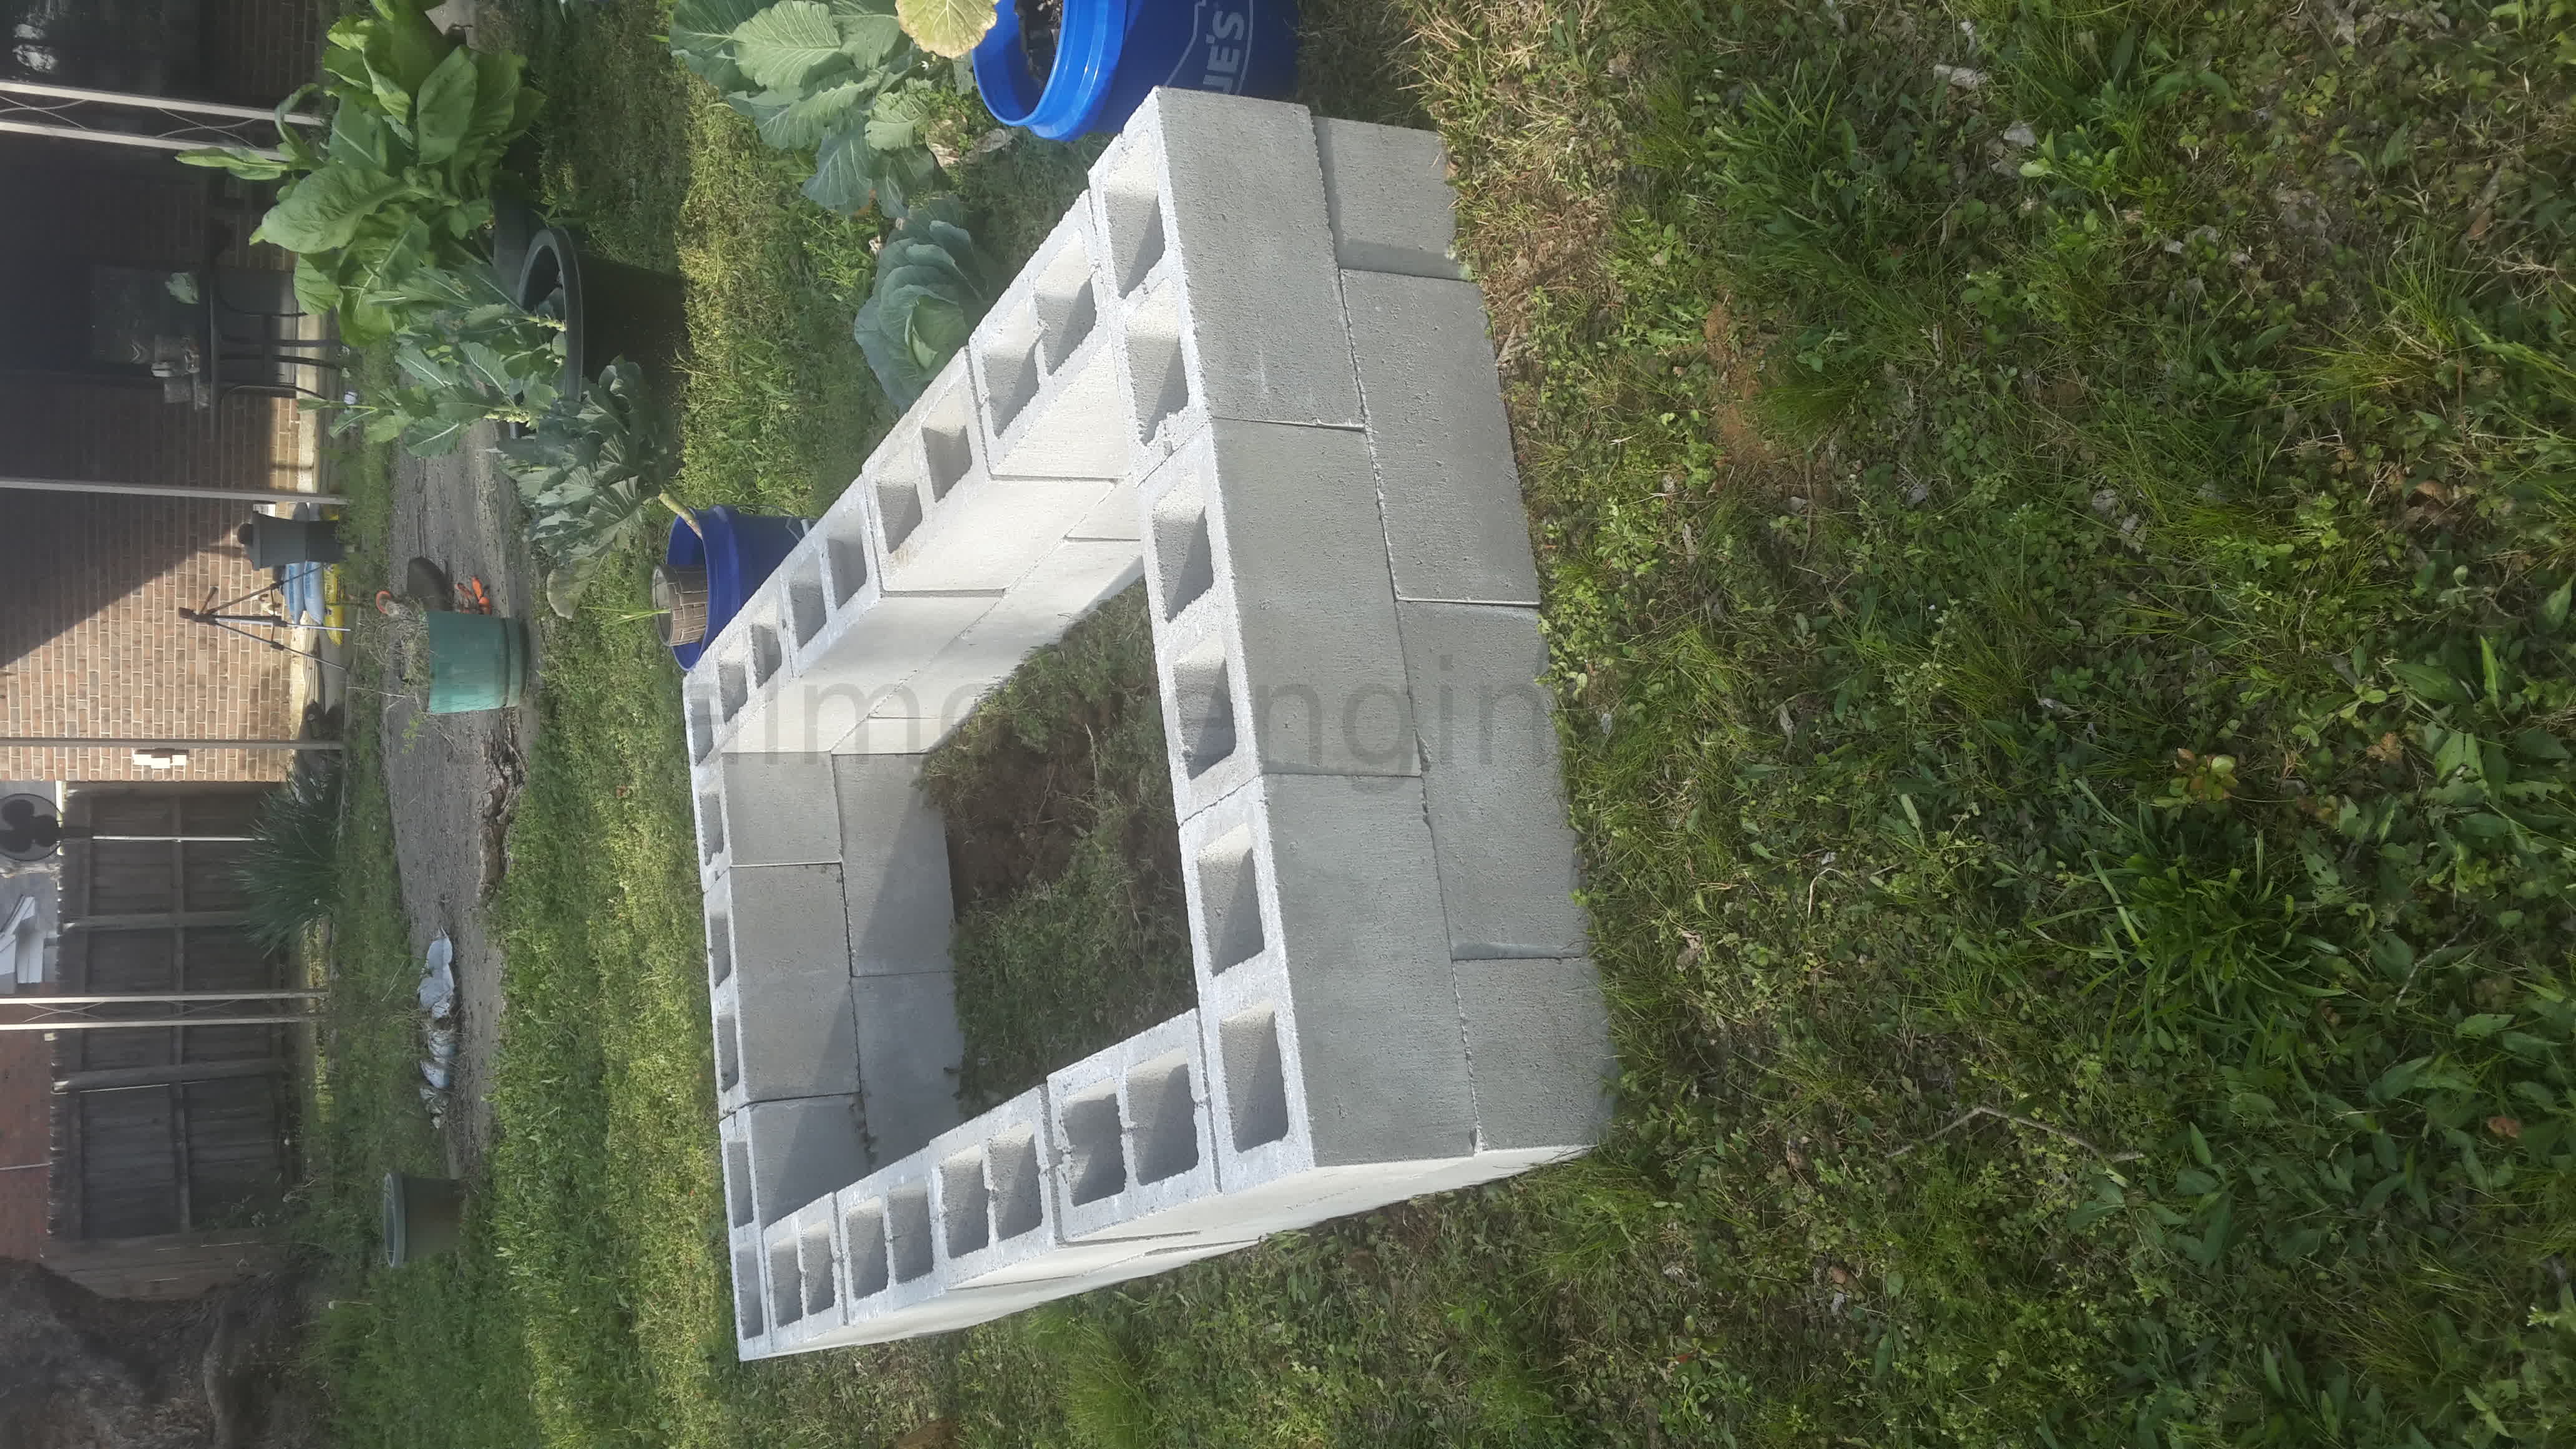 Showing blocks placed on the ground to make a raised bed